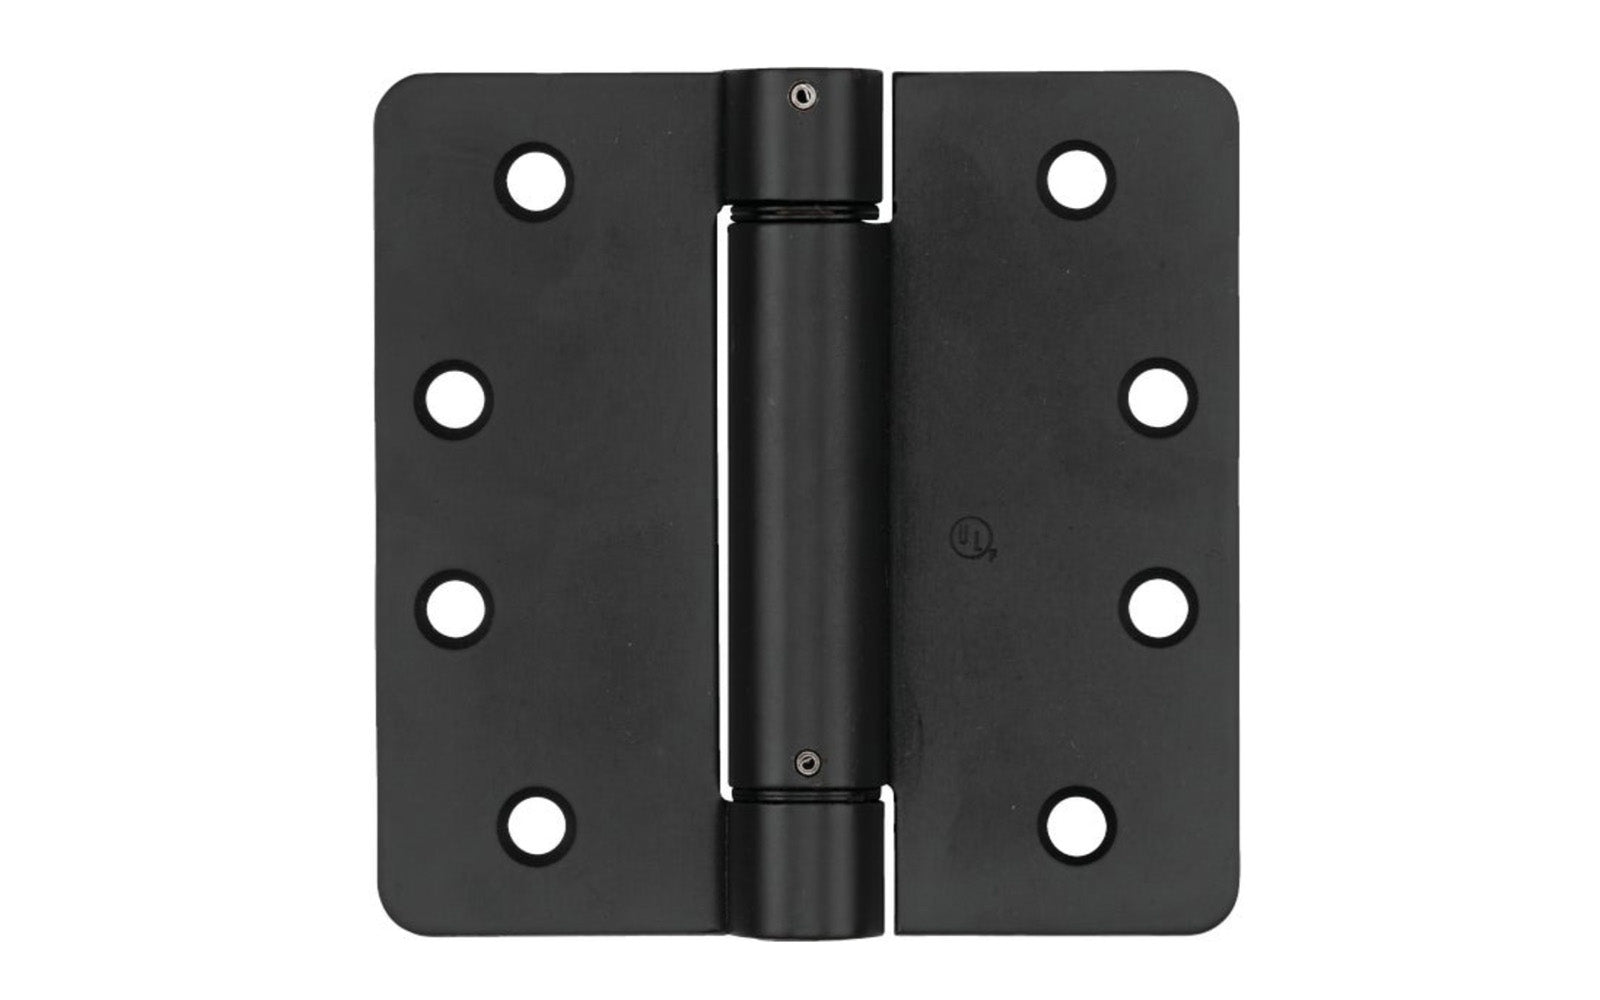 This 4" Oil Rubbed Bronze Finish Spring Hinge is designed for hanging self-closing doors in basements, stairways, garages, & entrances, etc. Can be used in residential, commercial, & apartment buildings. Hinge is UL approved for fire doors. Closing speed is adjustable. Fits standard hinge cutout. 1/4" radius, round corner automatic door-closing spring hinge. Oil Rubbed Bronze Finish on cold-rolled steel material. Sold as a single hinge in pack.  National Hardware Model No. N350-850.